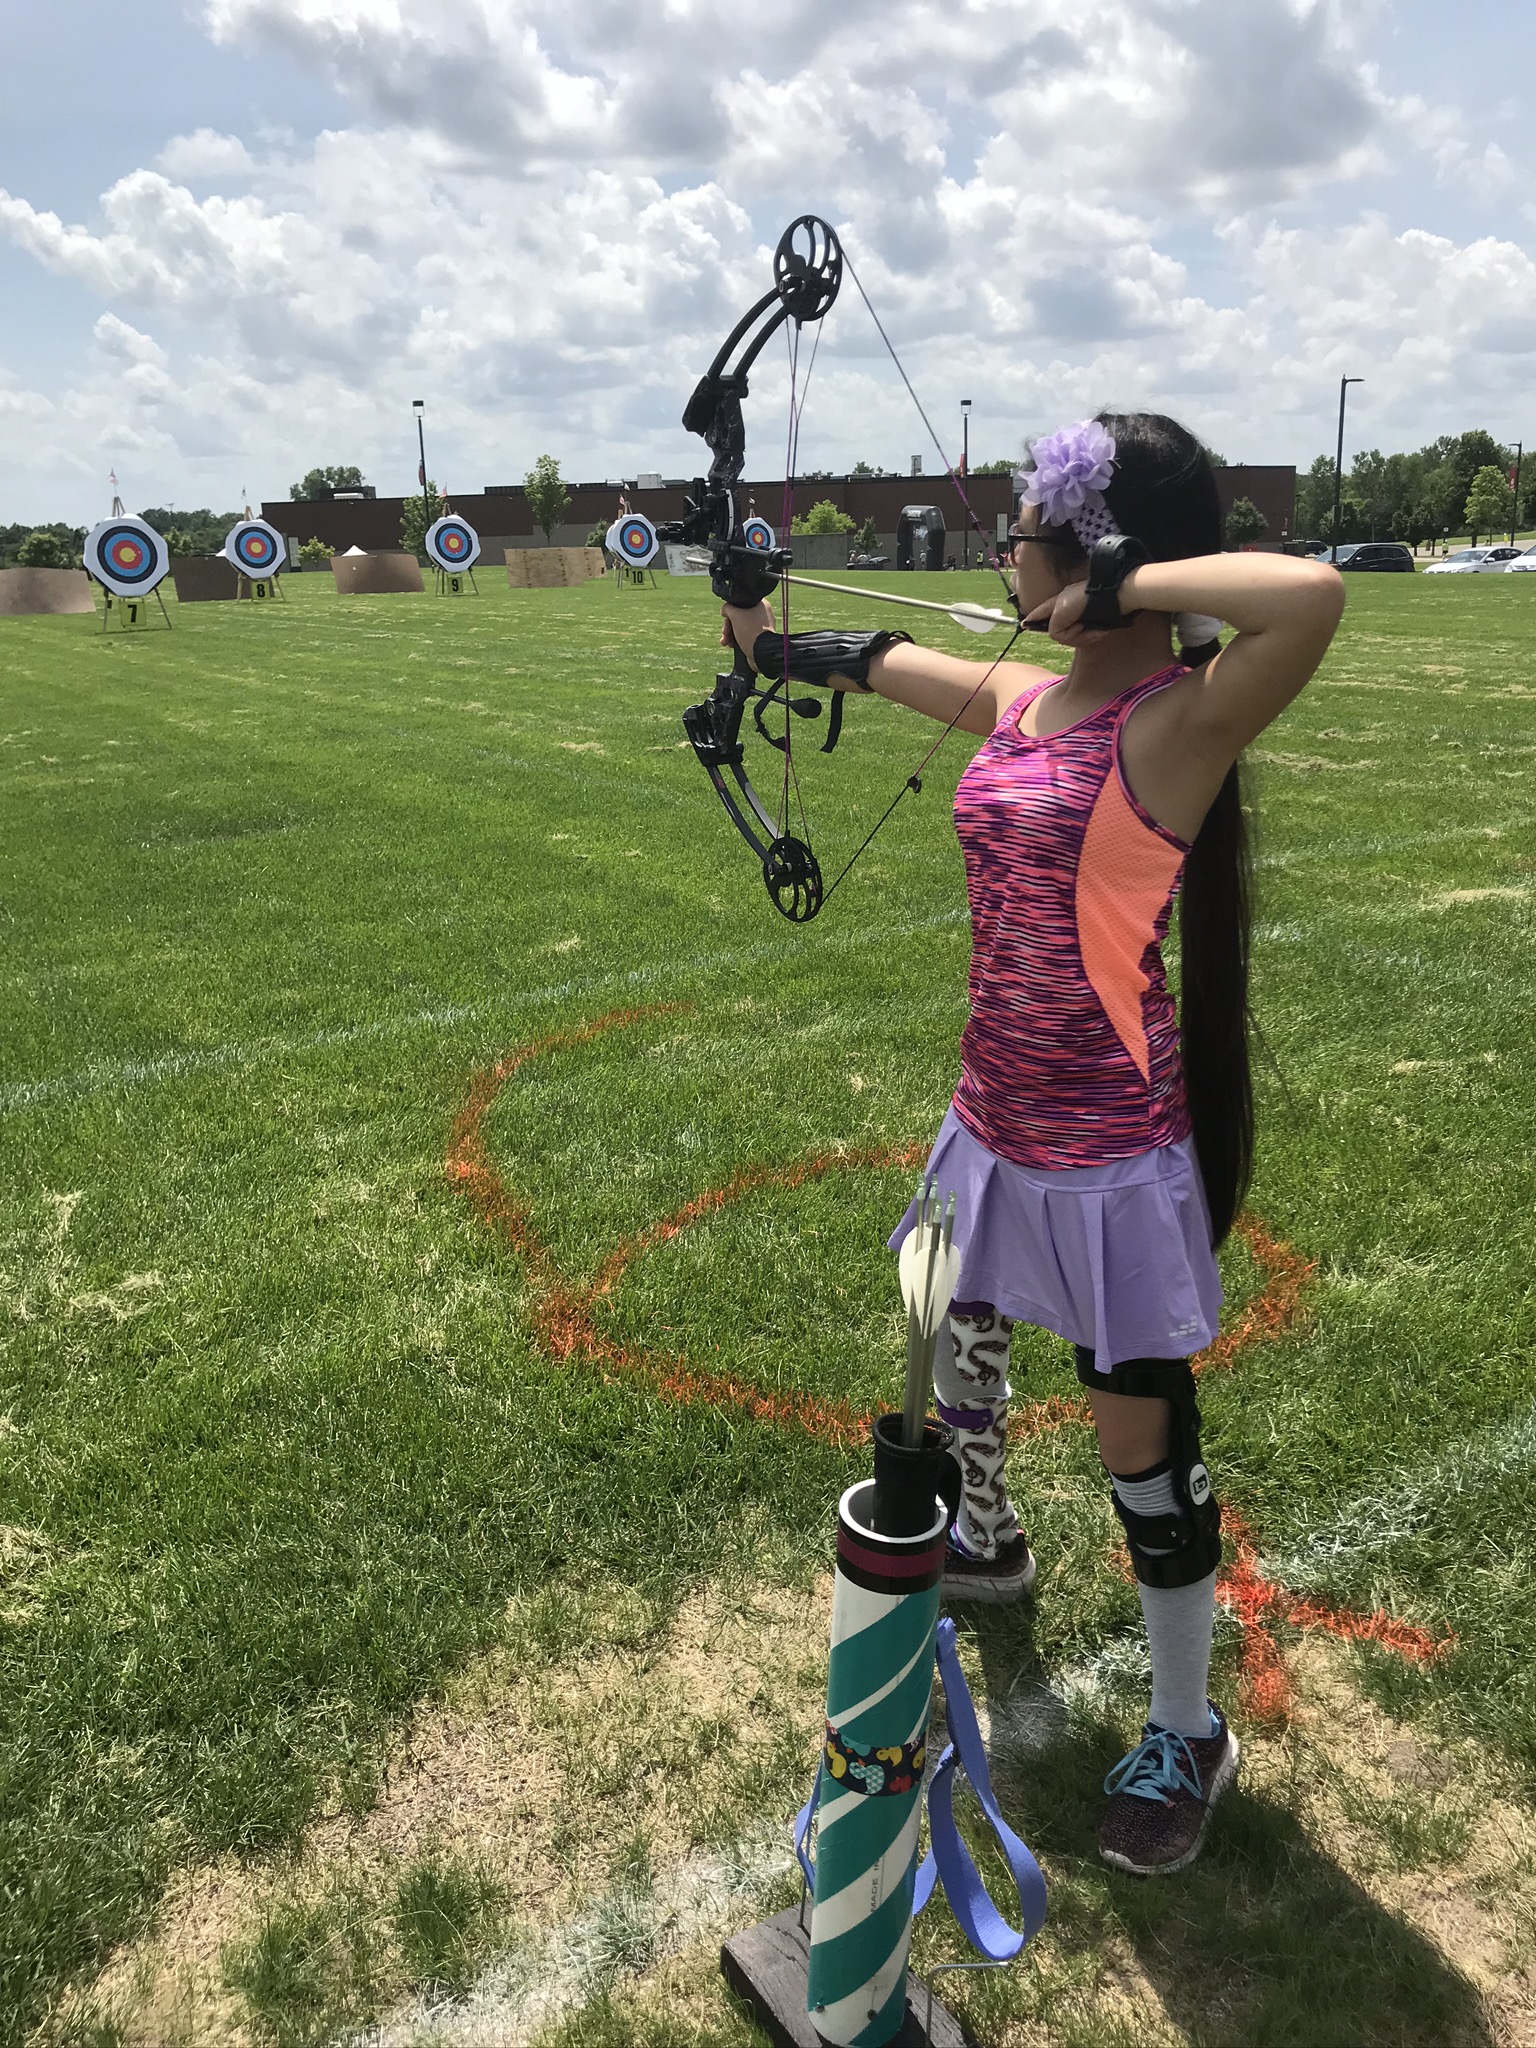 Female athlete aiming in archery